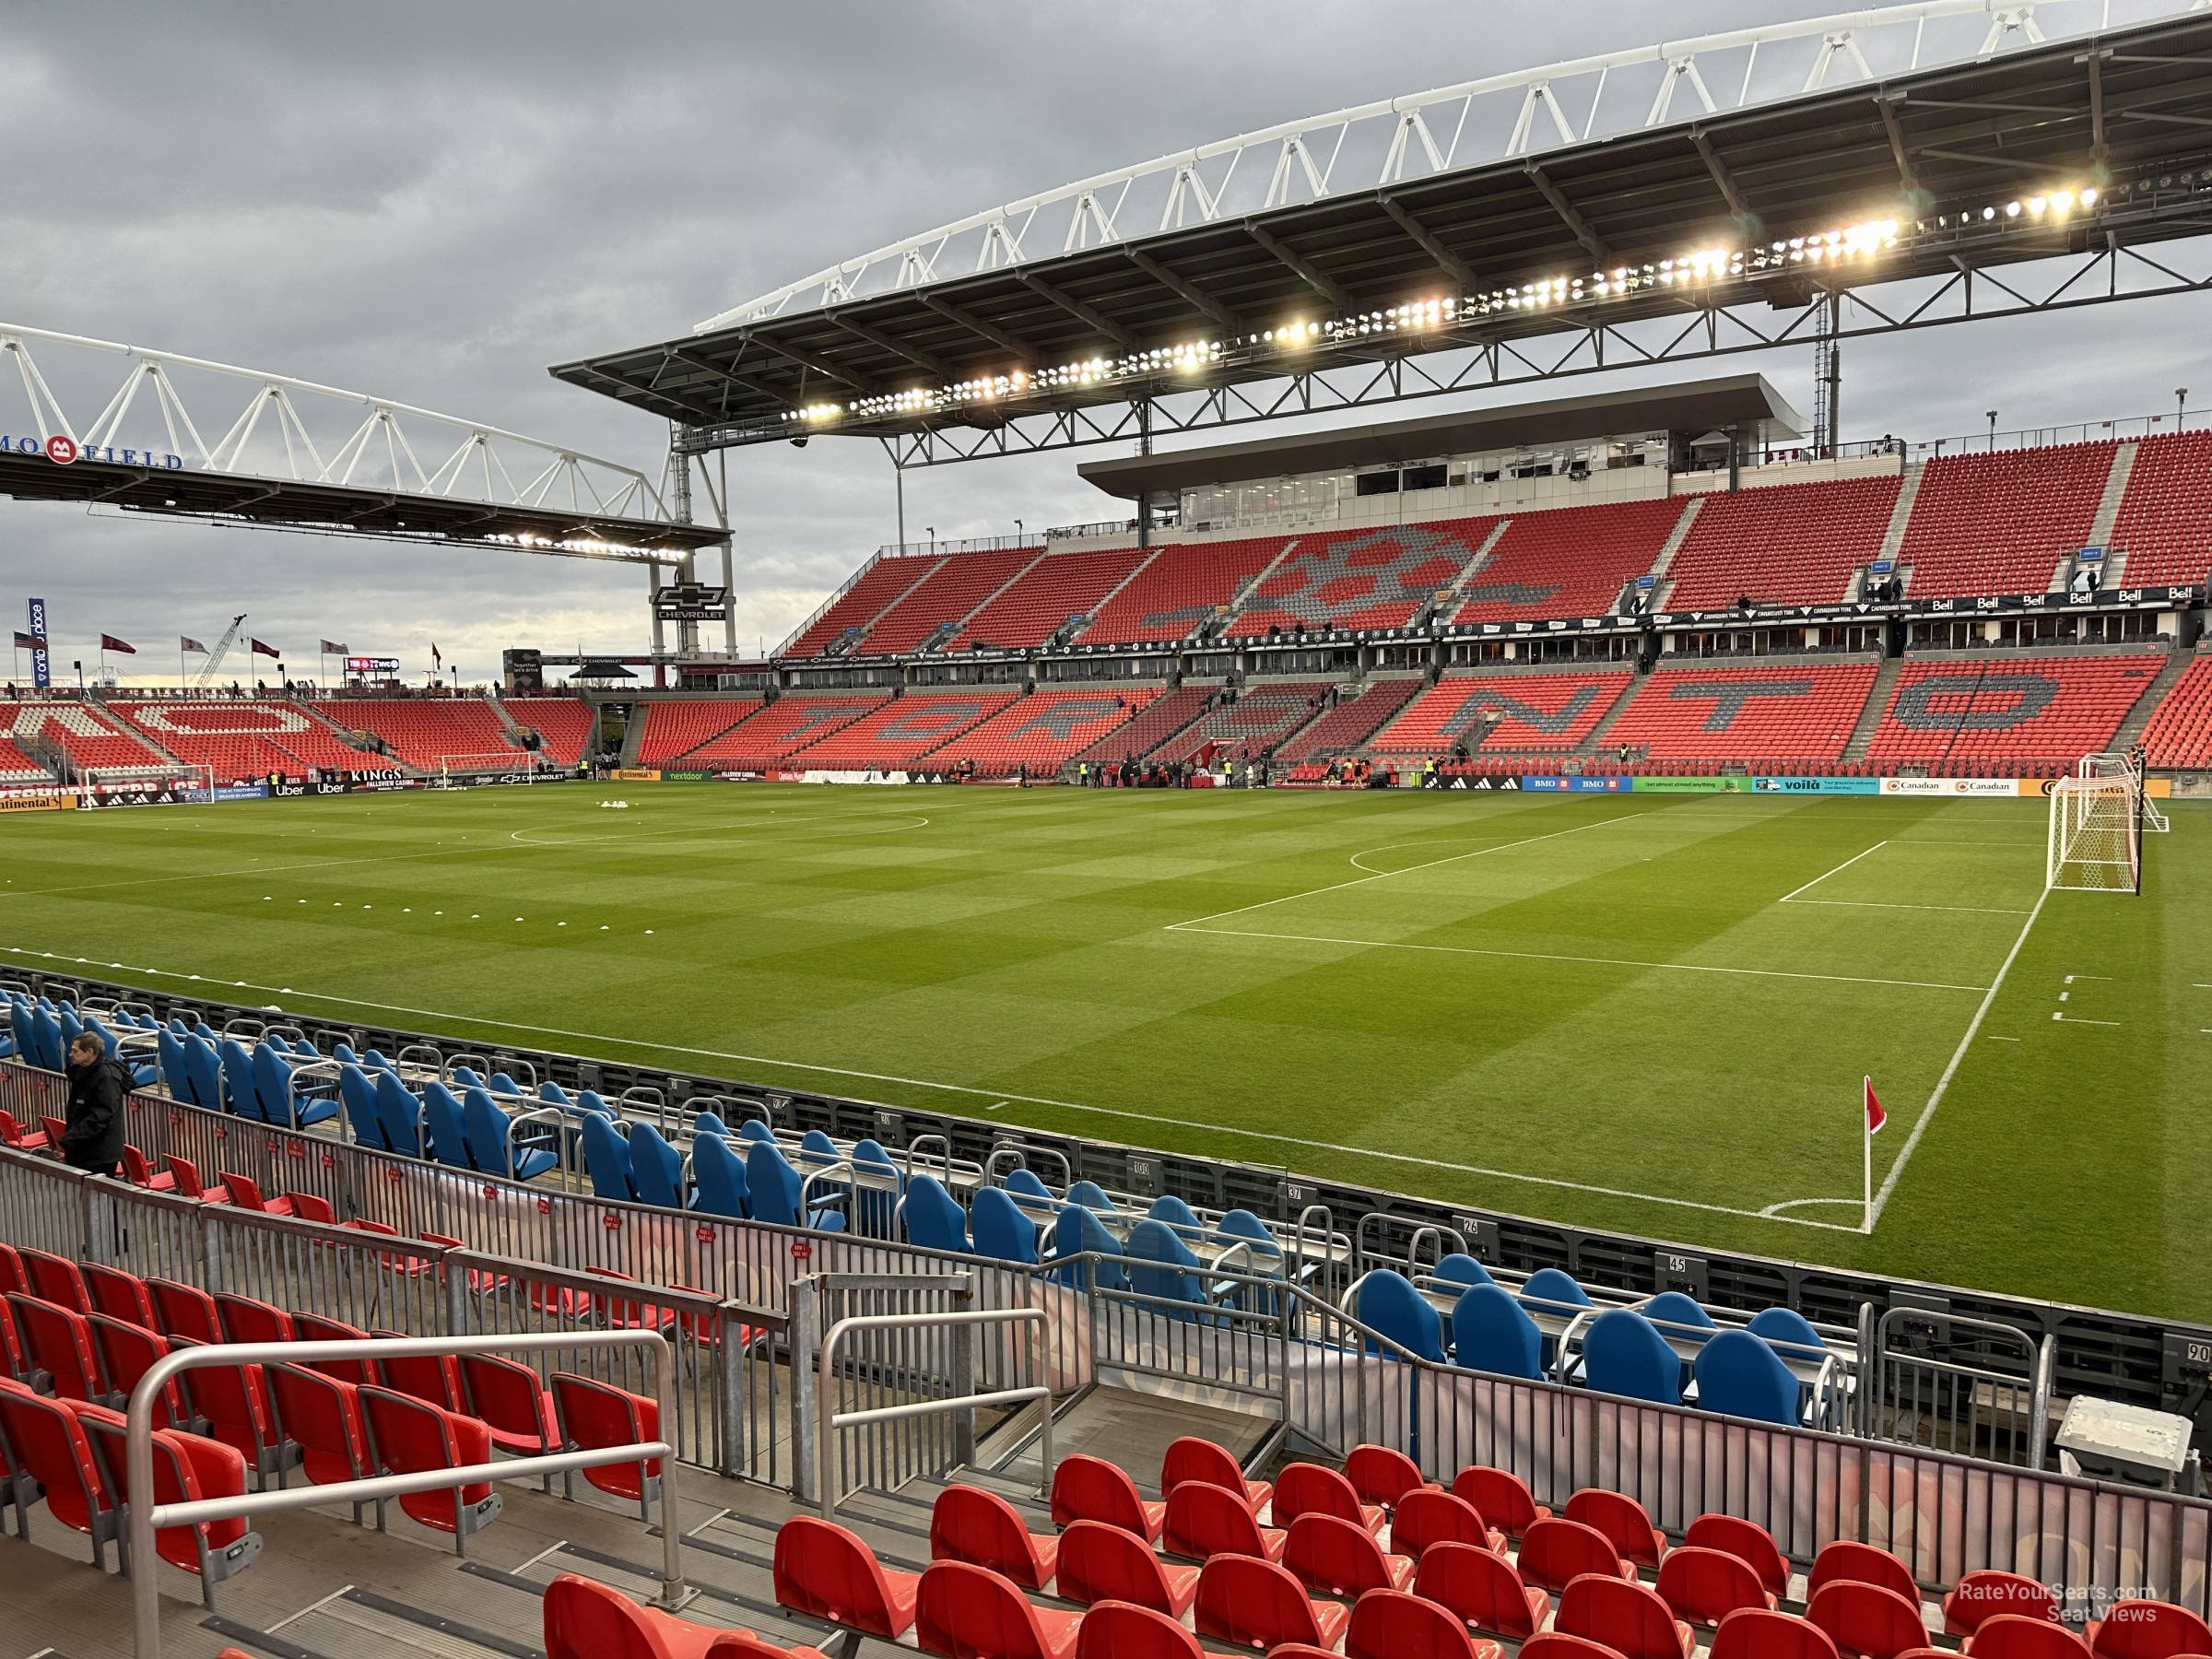 section 104, row 10 seat view  - bmo field